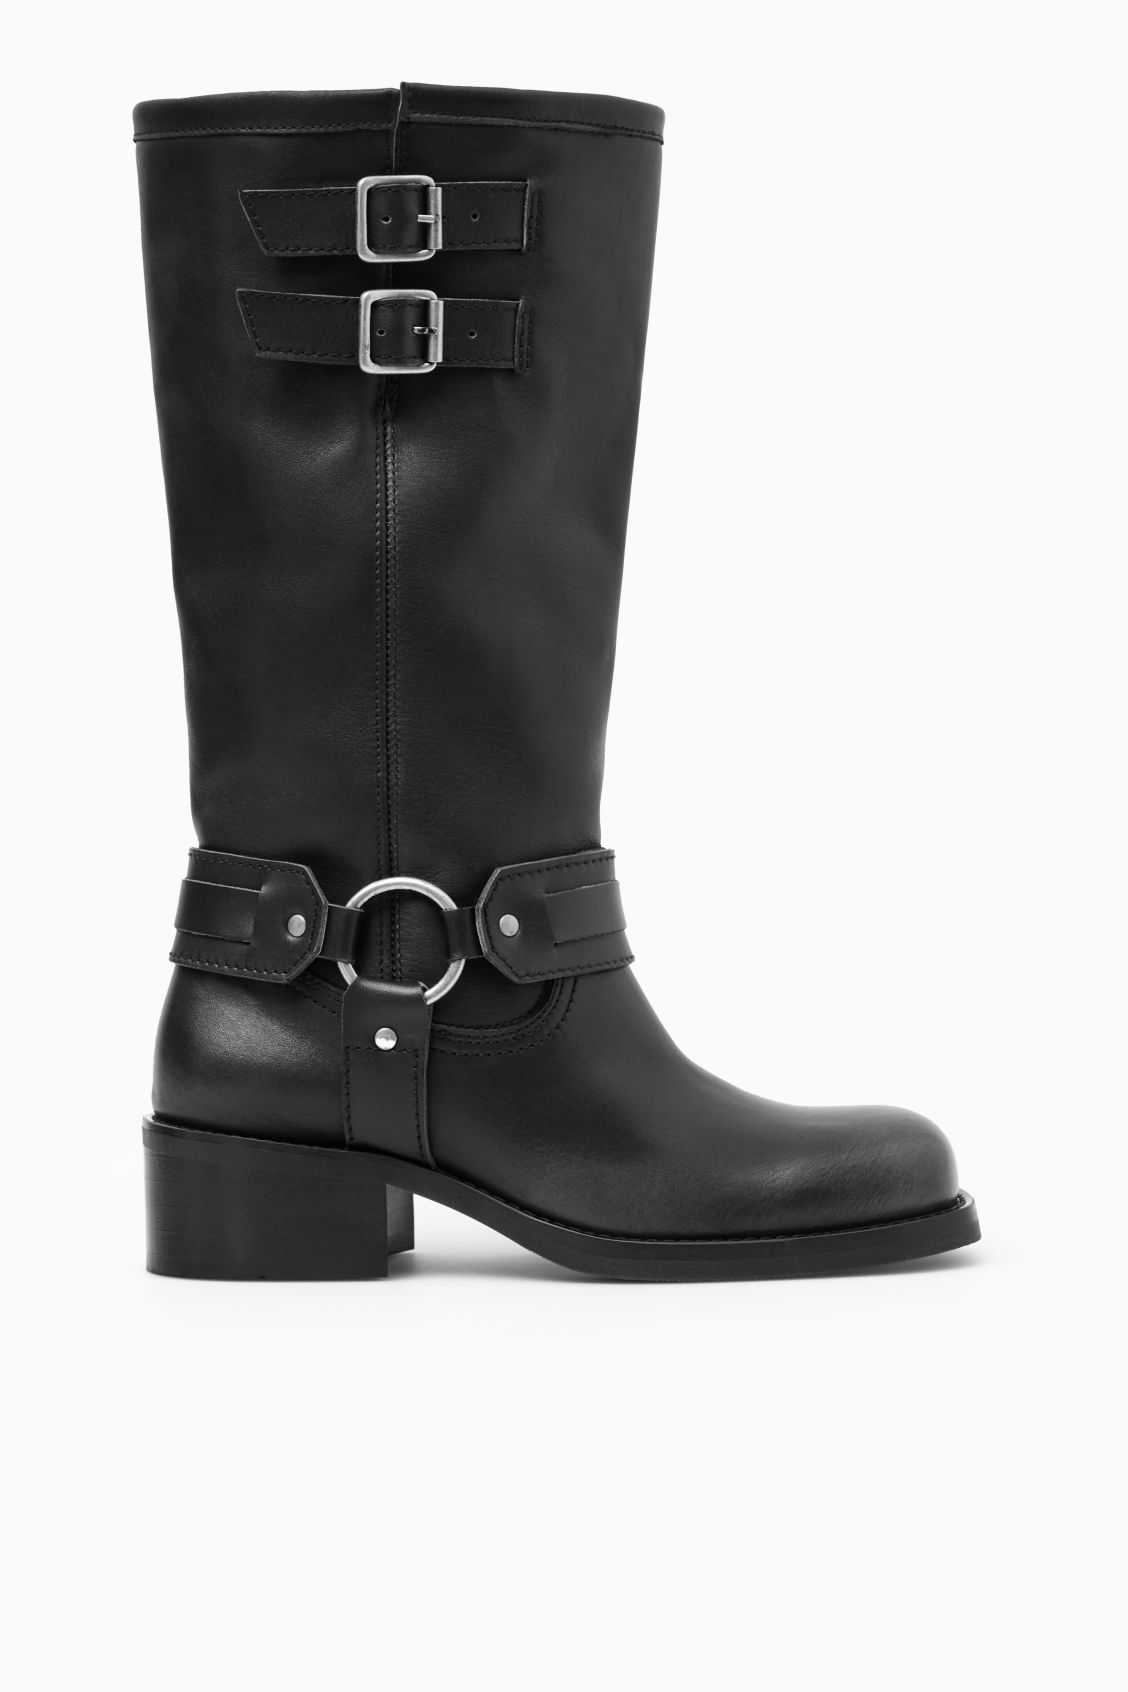 COS + Leather Biker Boots